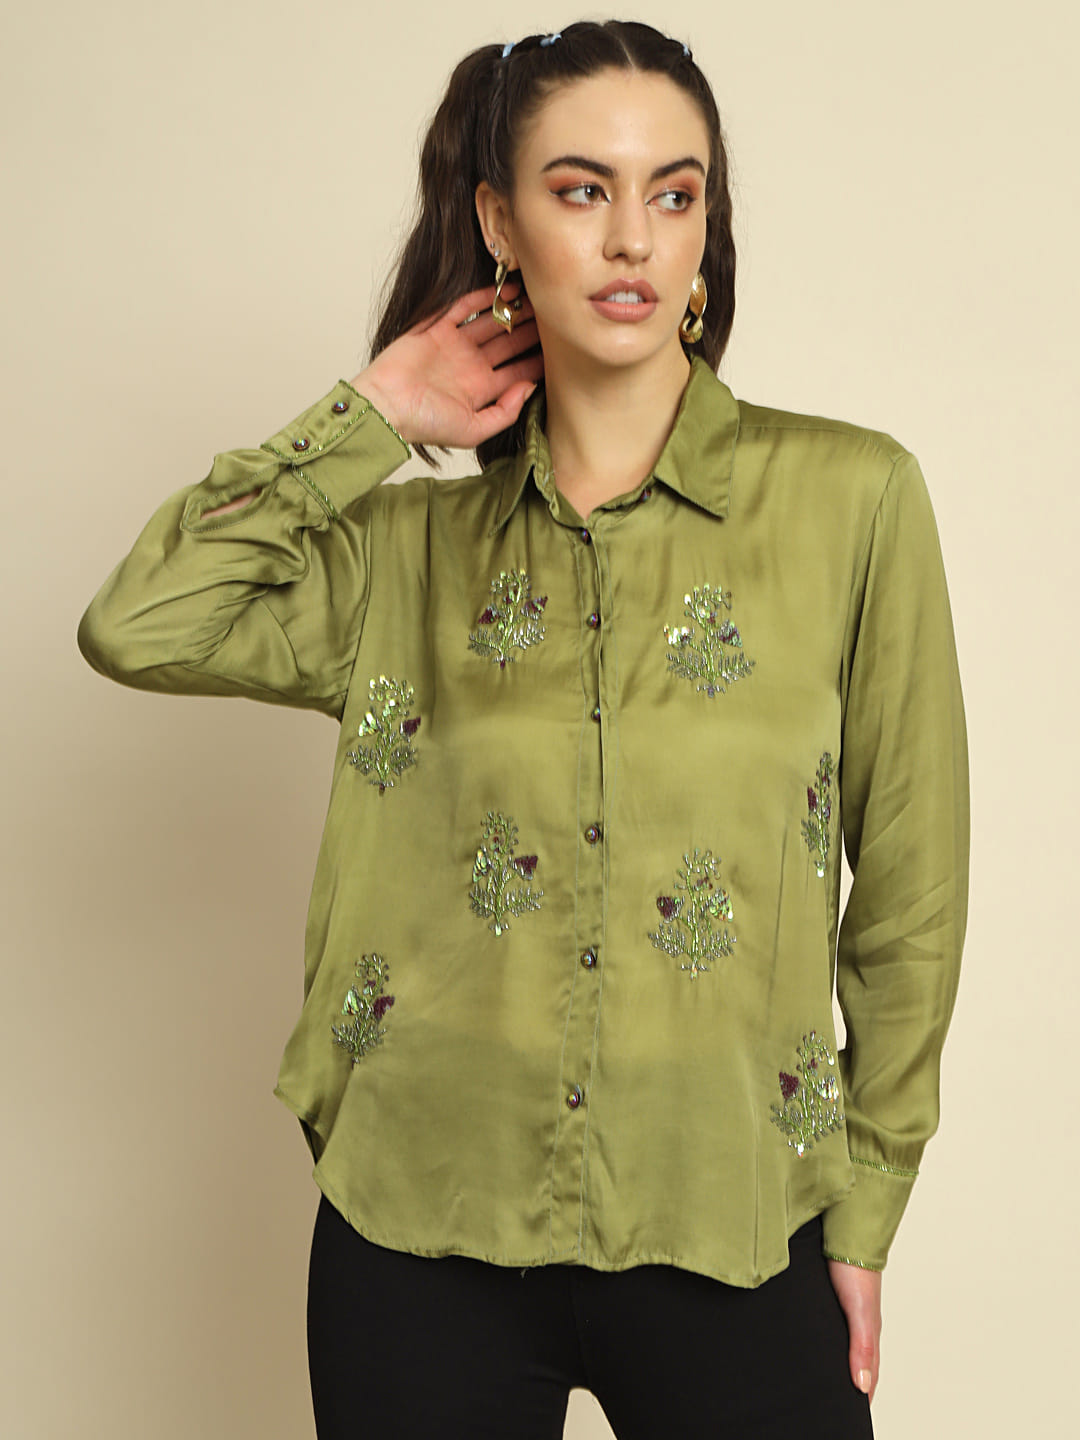 Whispers of Nature: An Olive Green Hand Embroidered Shirt